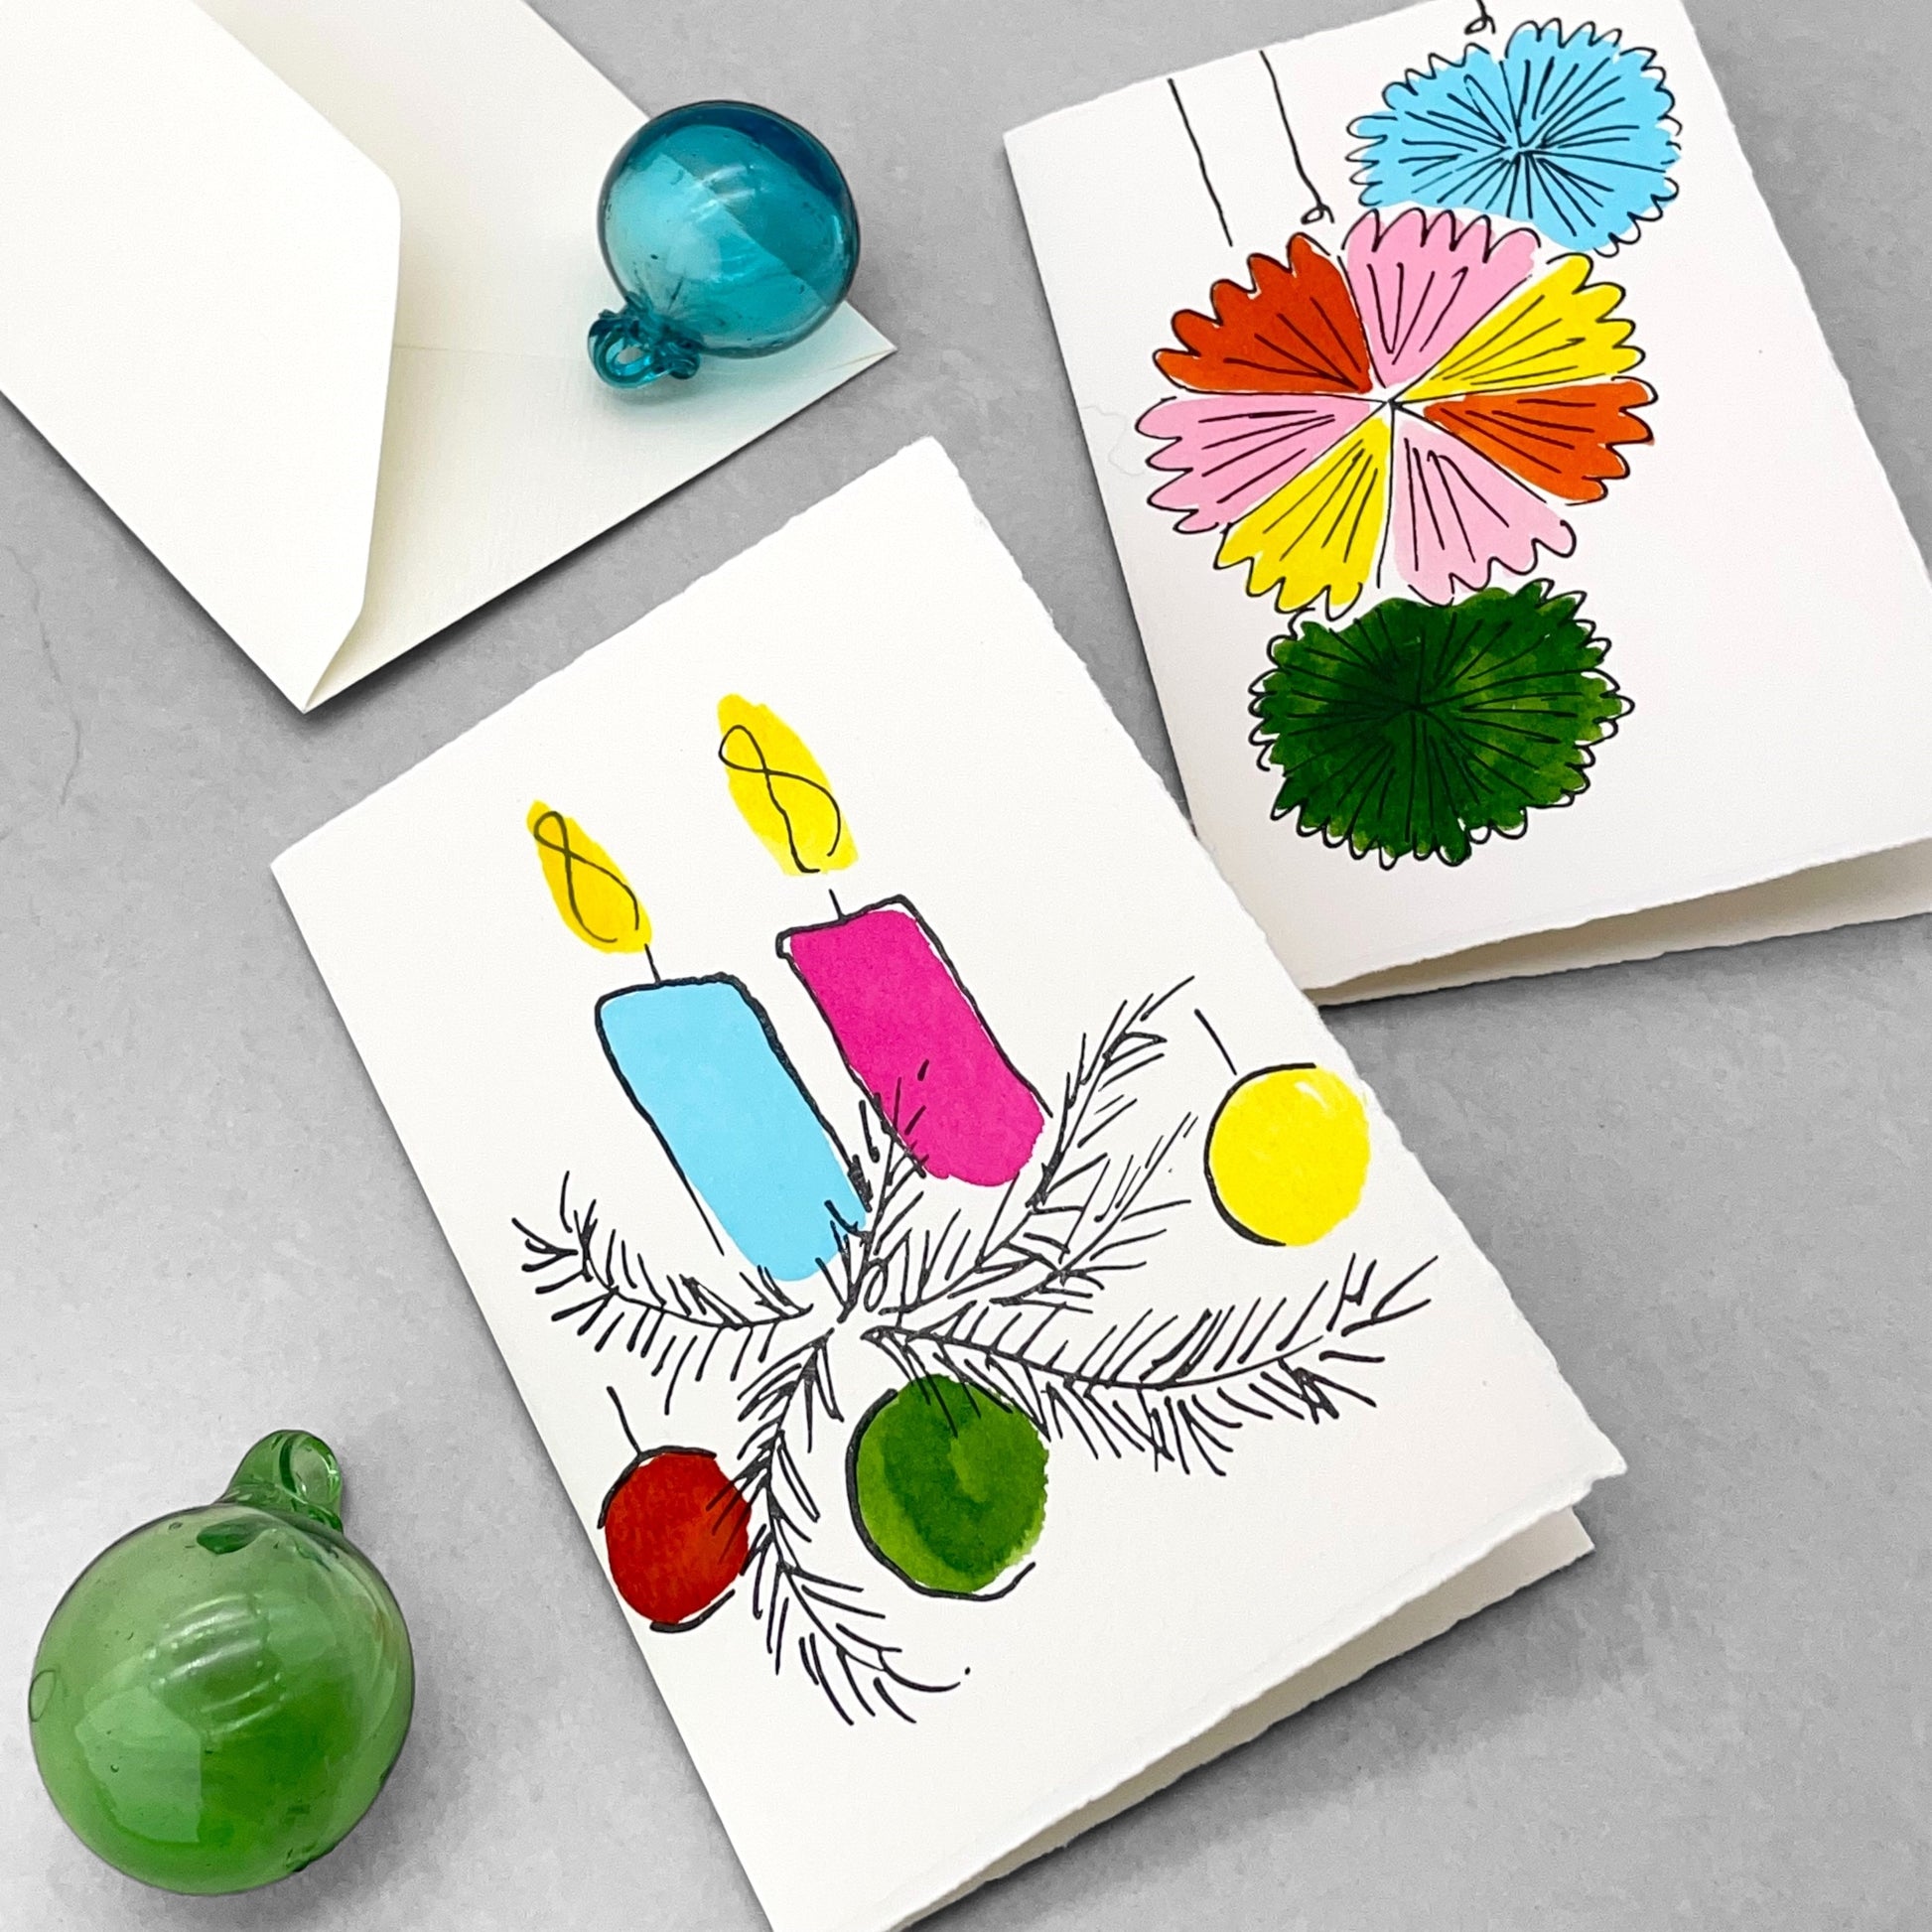 A letterpress printed card by Scribble & Daub. Two candles with foliage and baubles hand painted in a bright 70s colour palette of pink, red, yellow, light blue and green. Pictured with envelope, baubles and a pinwheel card from the same collection